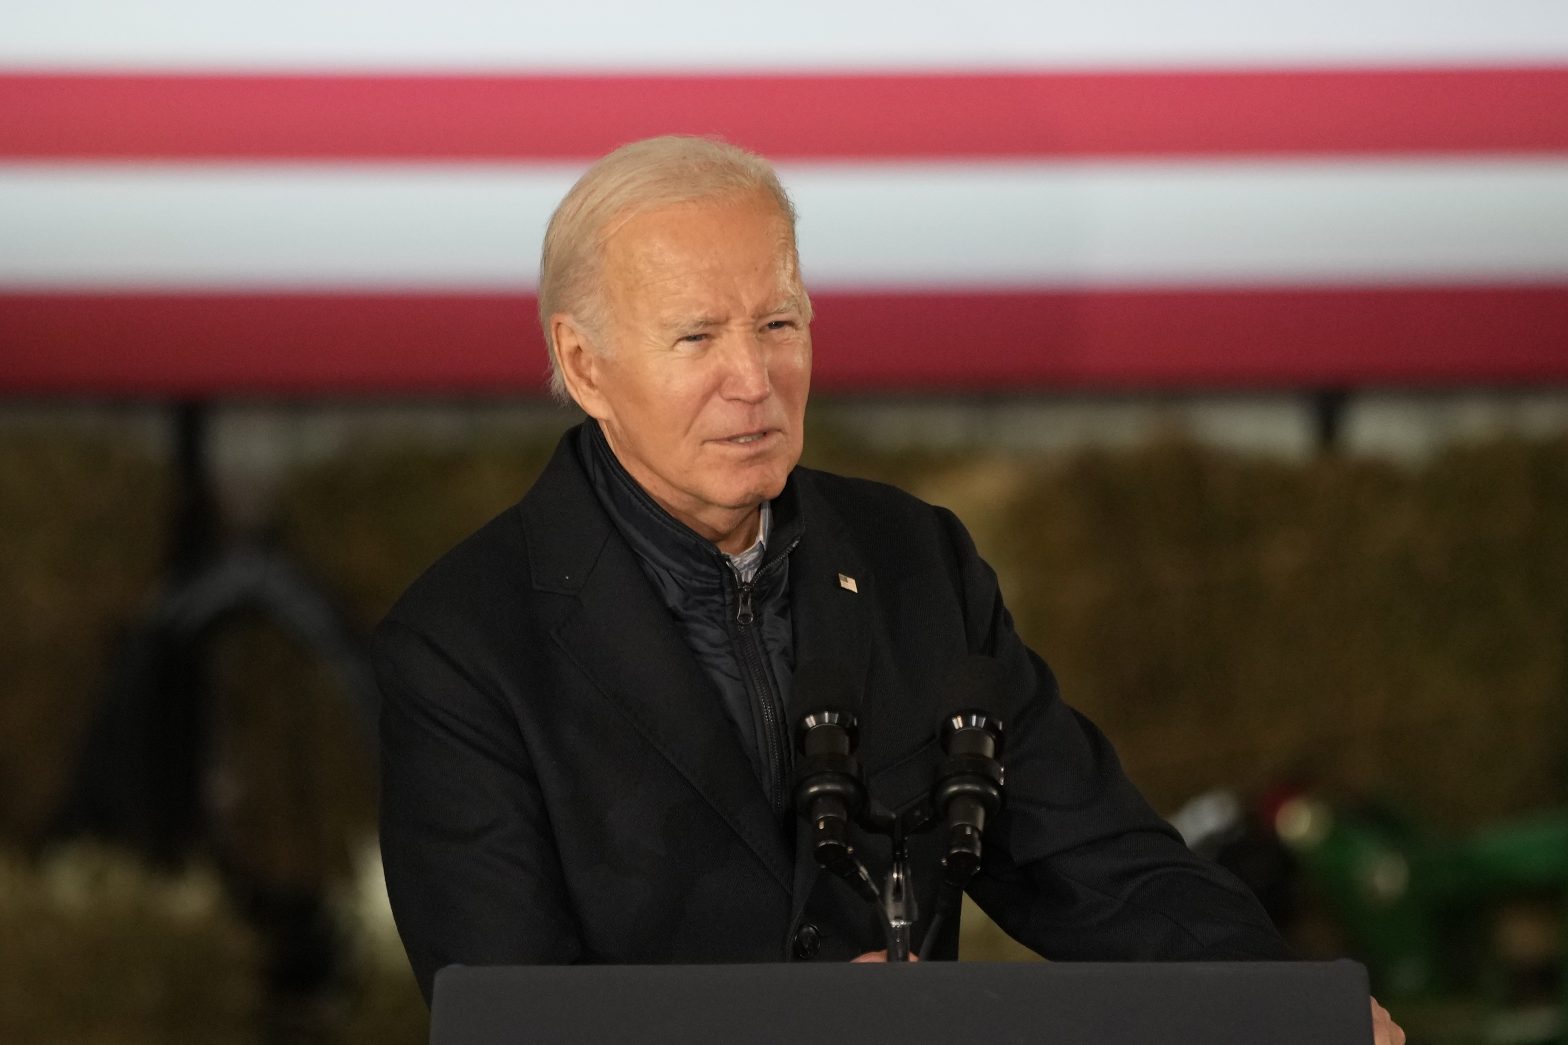 ‘Amtrak Joe’ Biden Is Off to Delaware to Give Out $16B for Passenger Rail Projects